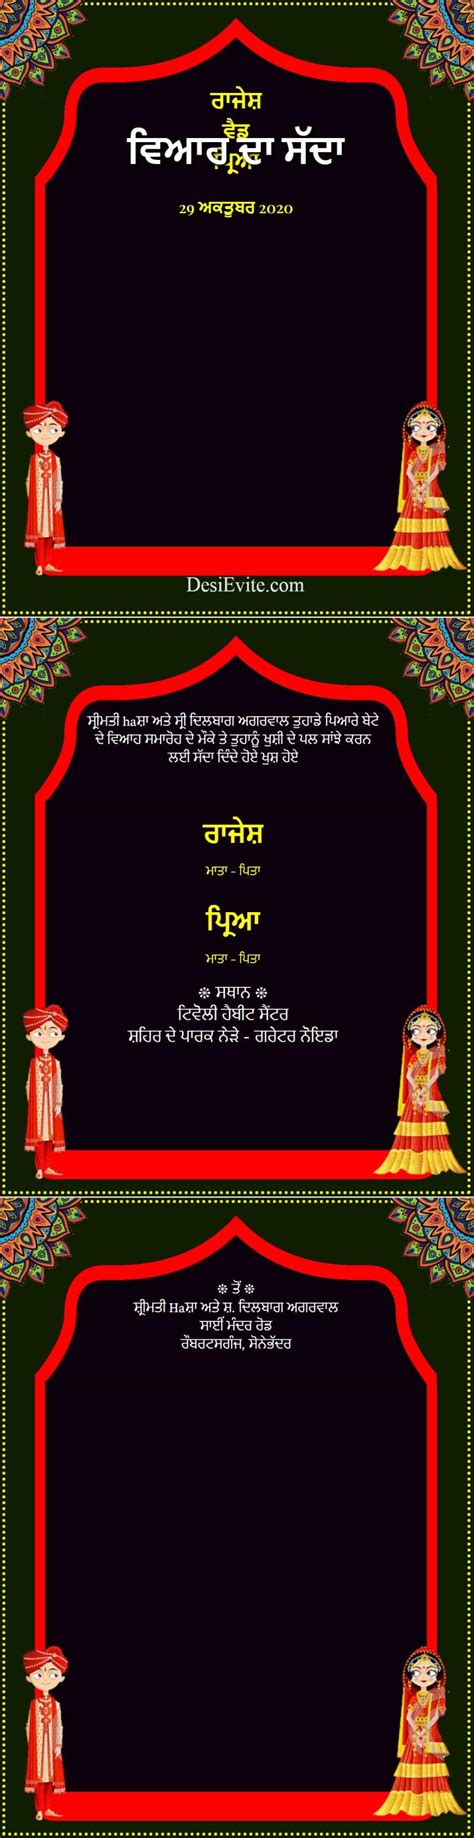 Punjabi Wedding Invitation Card With 3 Pages